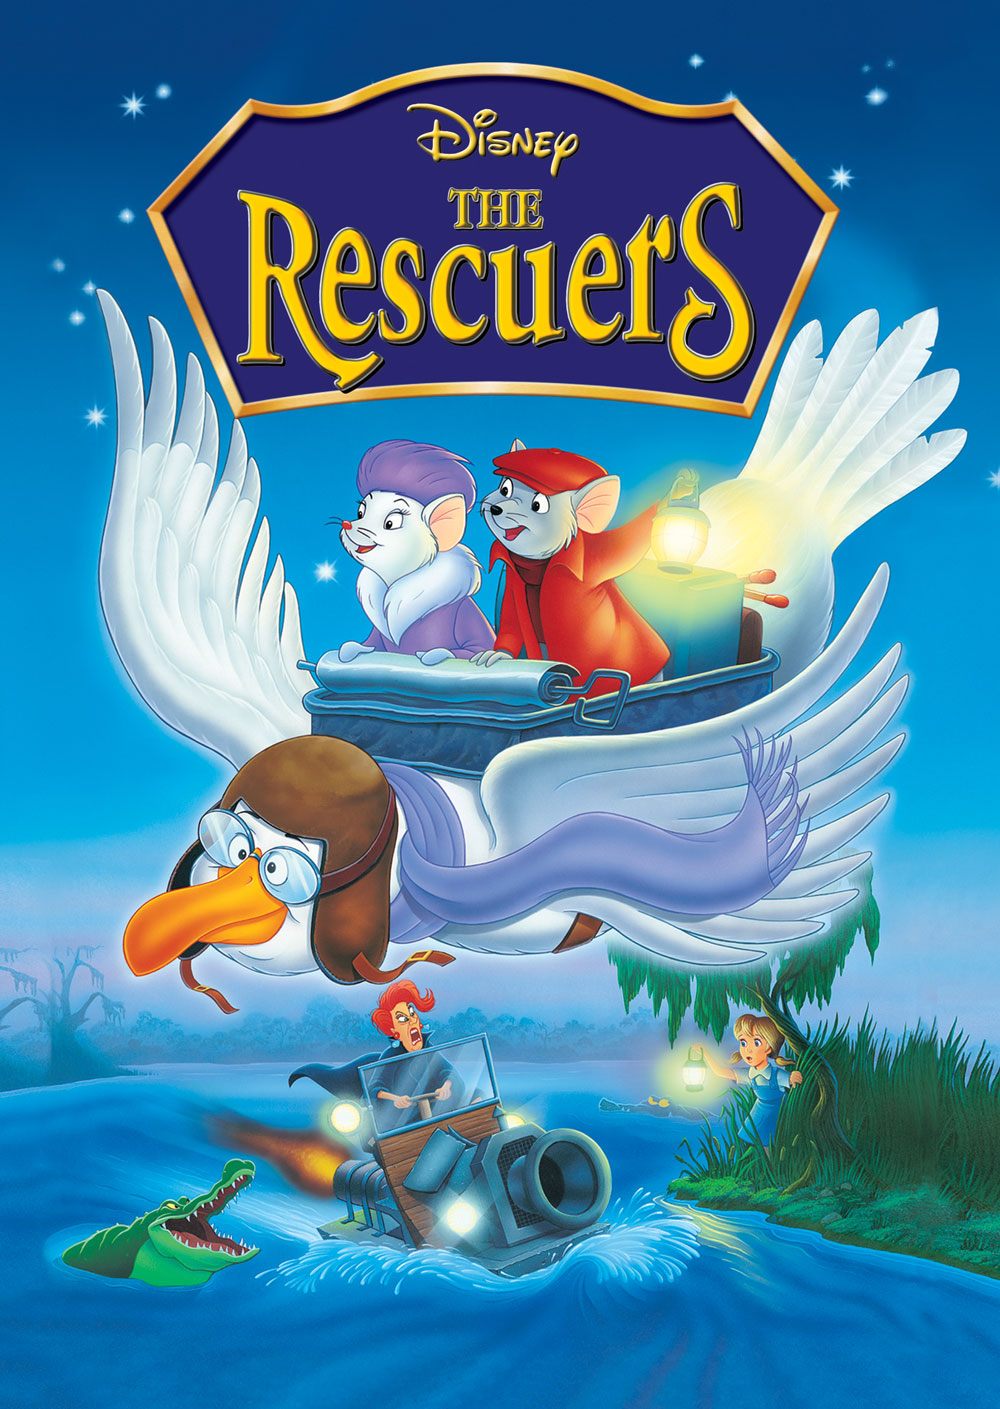 The_Rescuers_1977_DVD_Cover.jpg